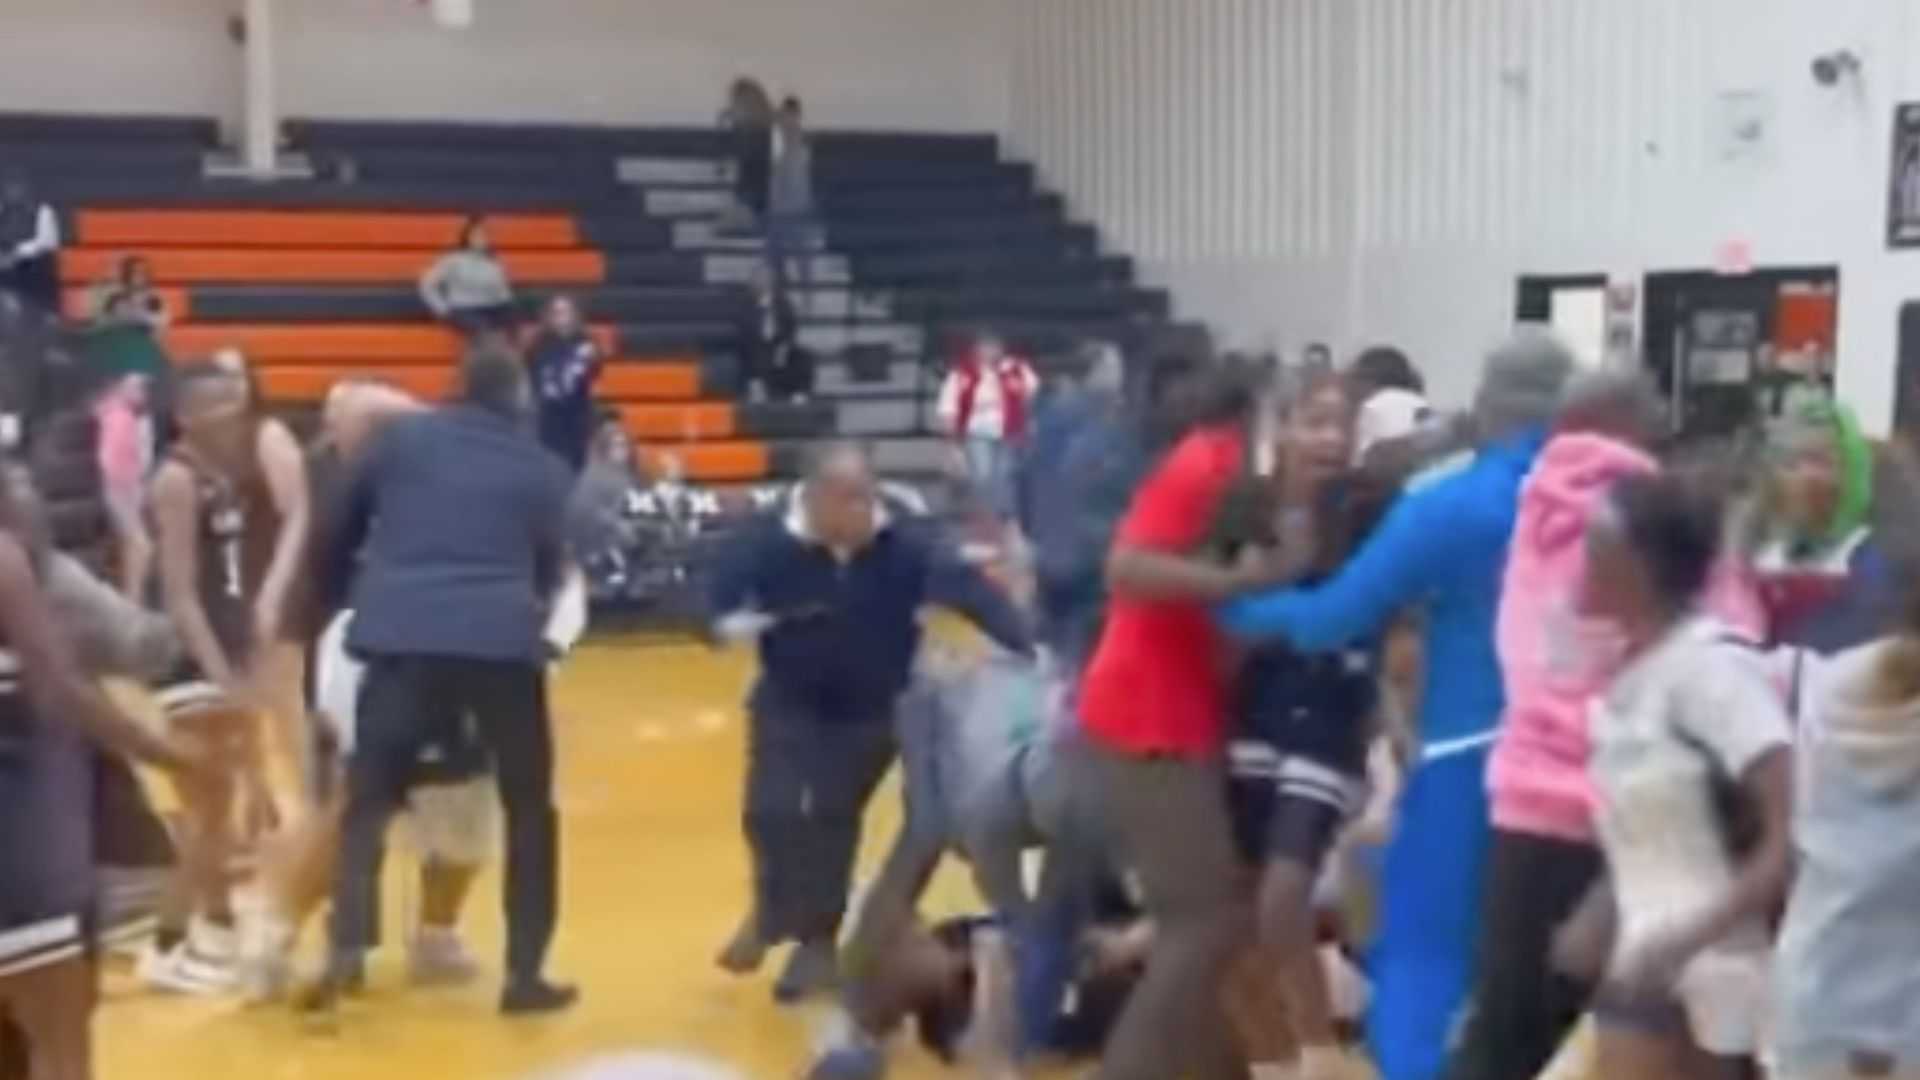 Chaotic Brawl Breaks Out At Girls High School Basketball Game Between Players, Spectators, And Even Cheerleaders (mediaite.com)